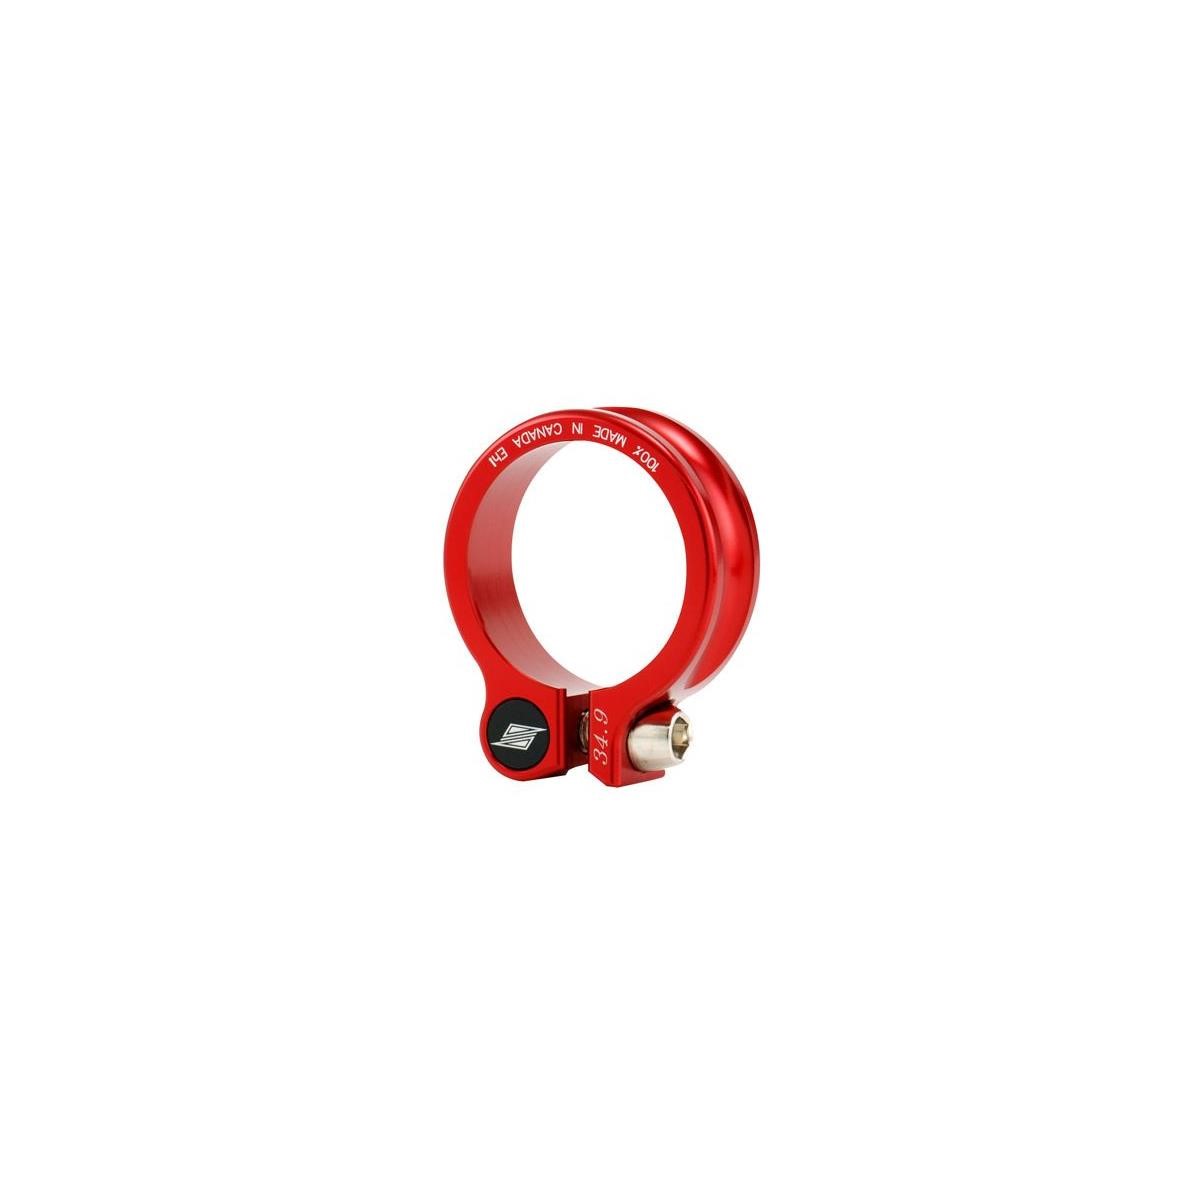 Straitline Components Seat Clamp Seatpost Collar Red, 34.9 mm